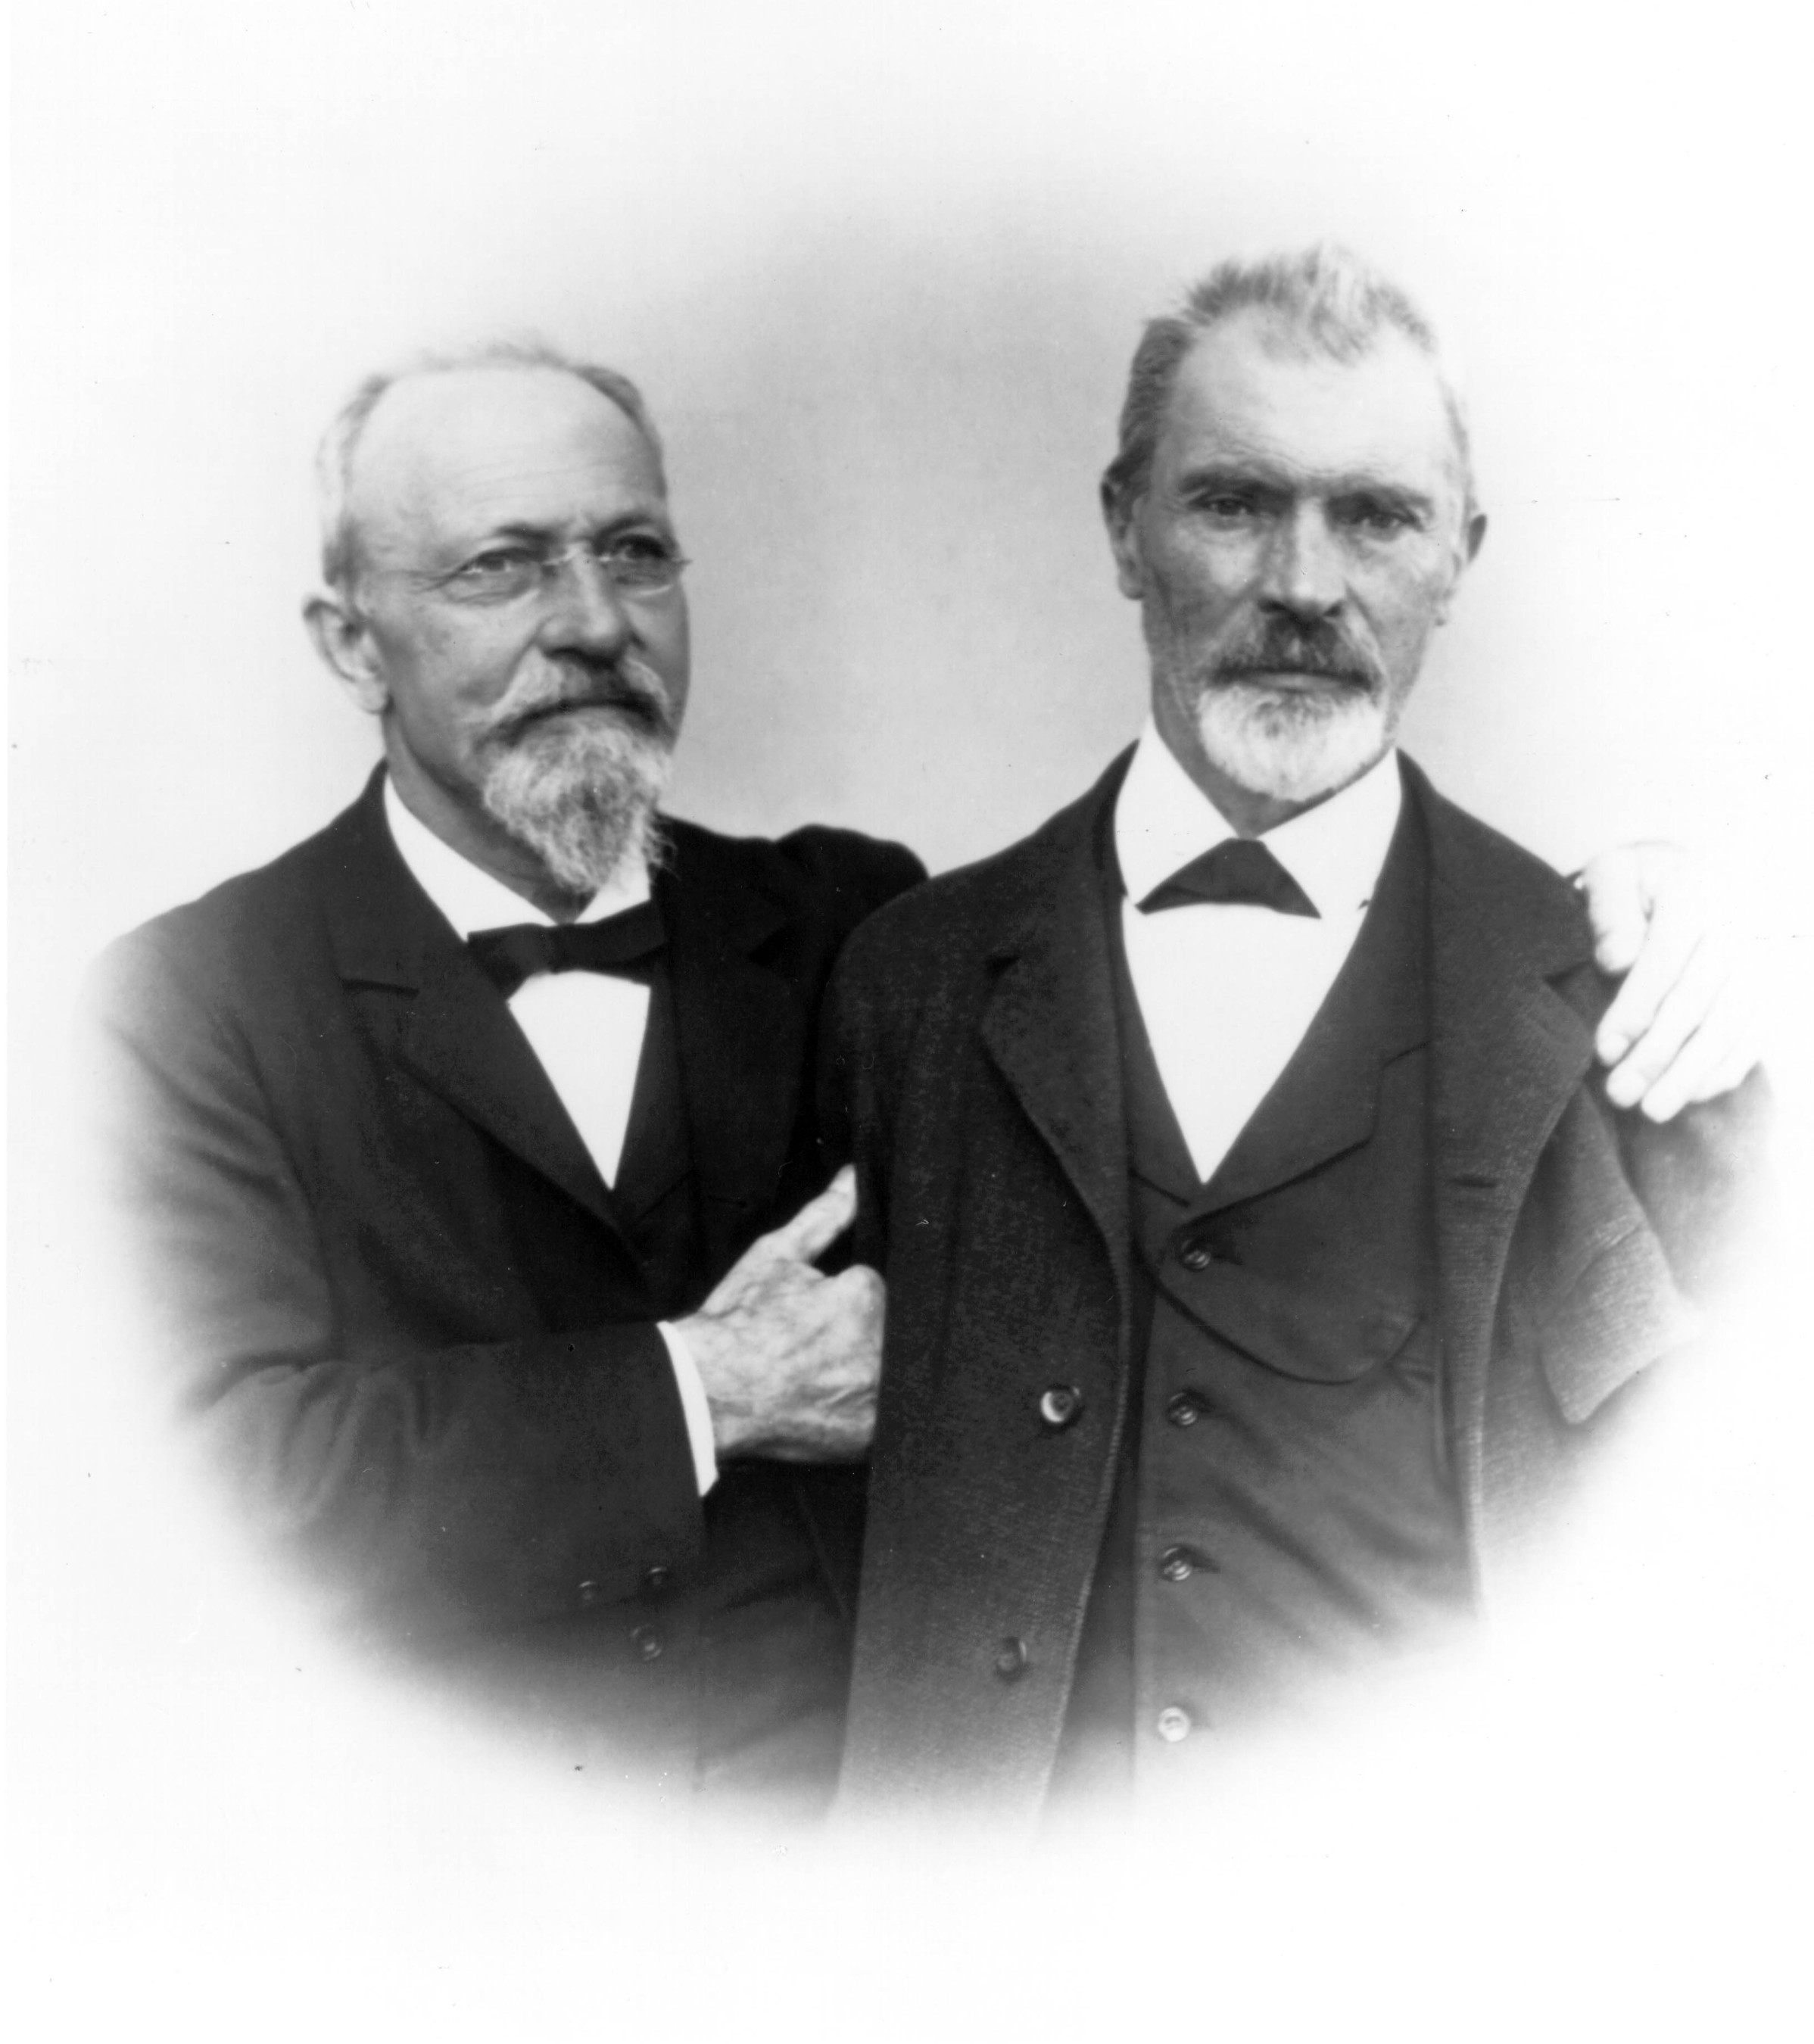 Bausch + Lomb began as a humble enterprise nearly 170 years ago when J.J. Bausch (left) set up a tiny optical goods shop in Rochester, New York. He was later joined by his good friend and business partner, Henry Lomb (right).